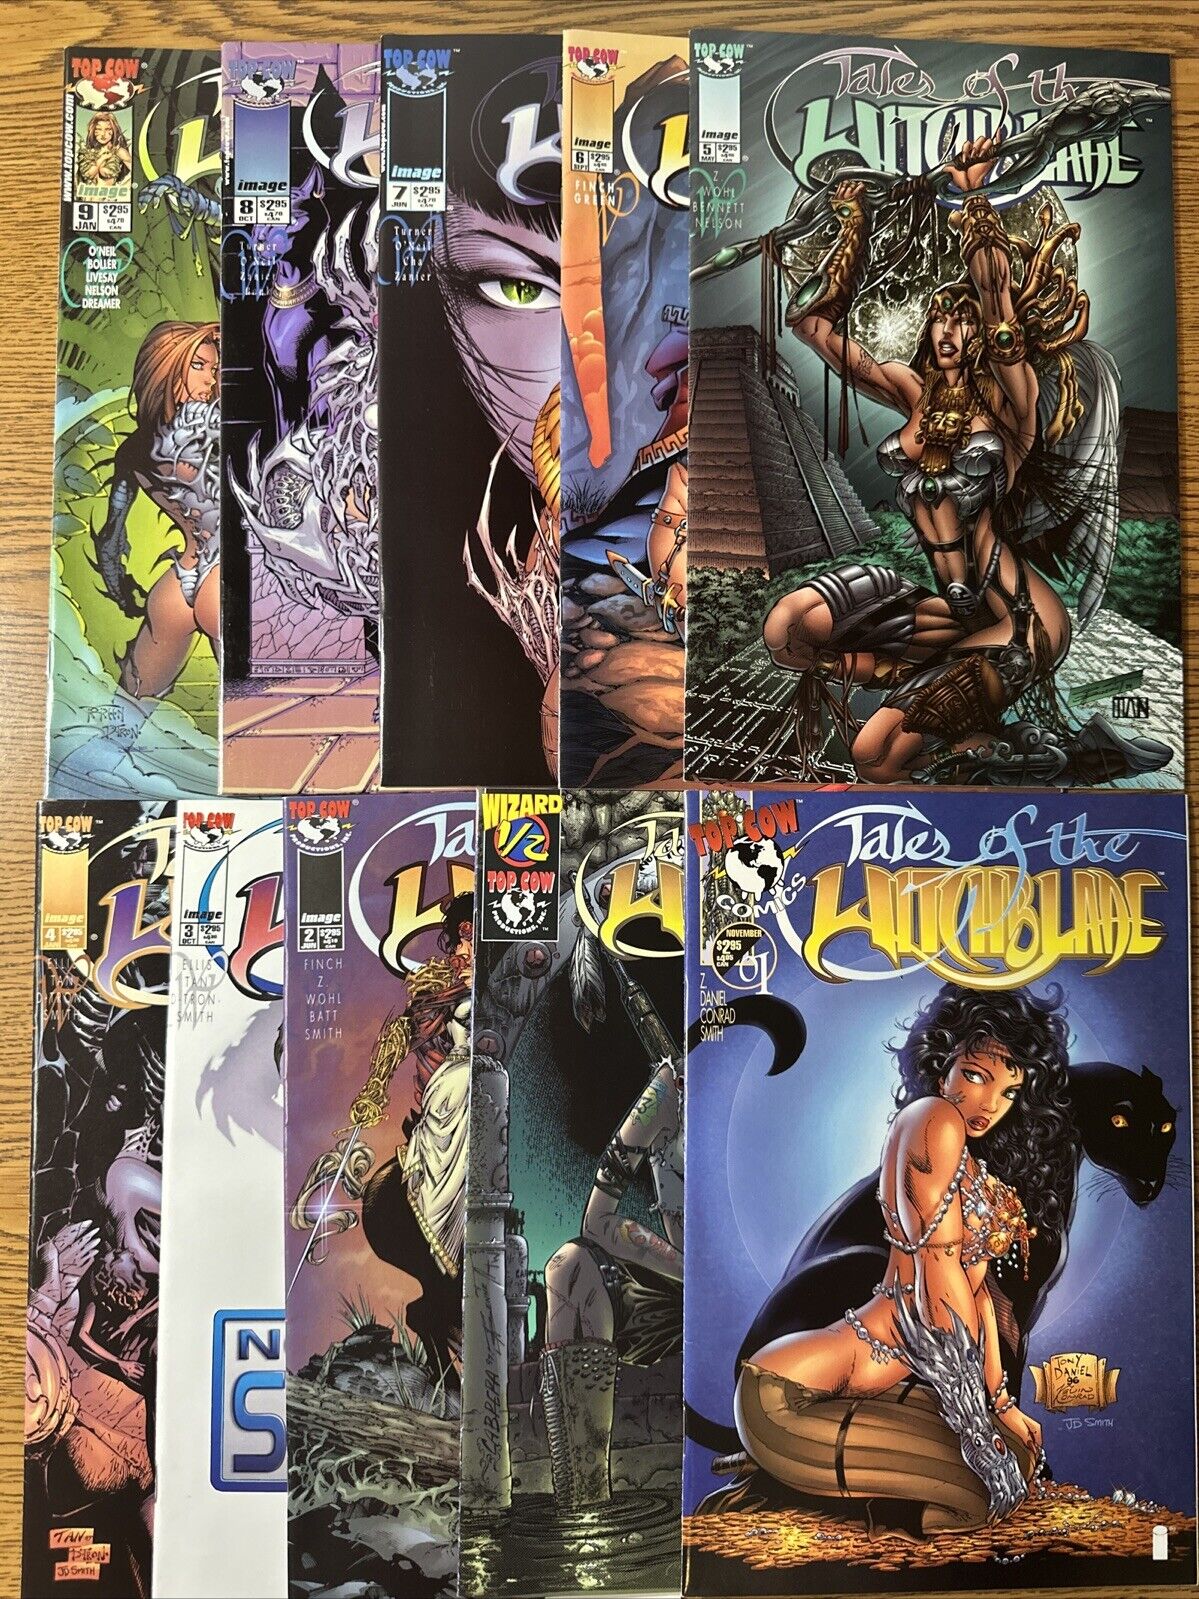 Tales of Witchblade #1/2 1 2 3 4 5 6 7 8 9 Lot Run Set Top Cow Image 1st VF/NM